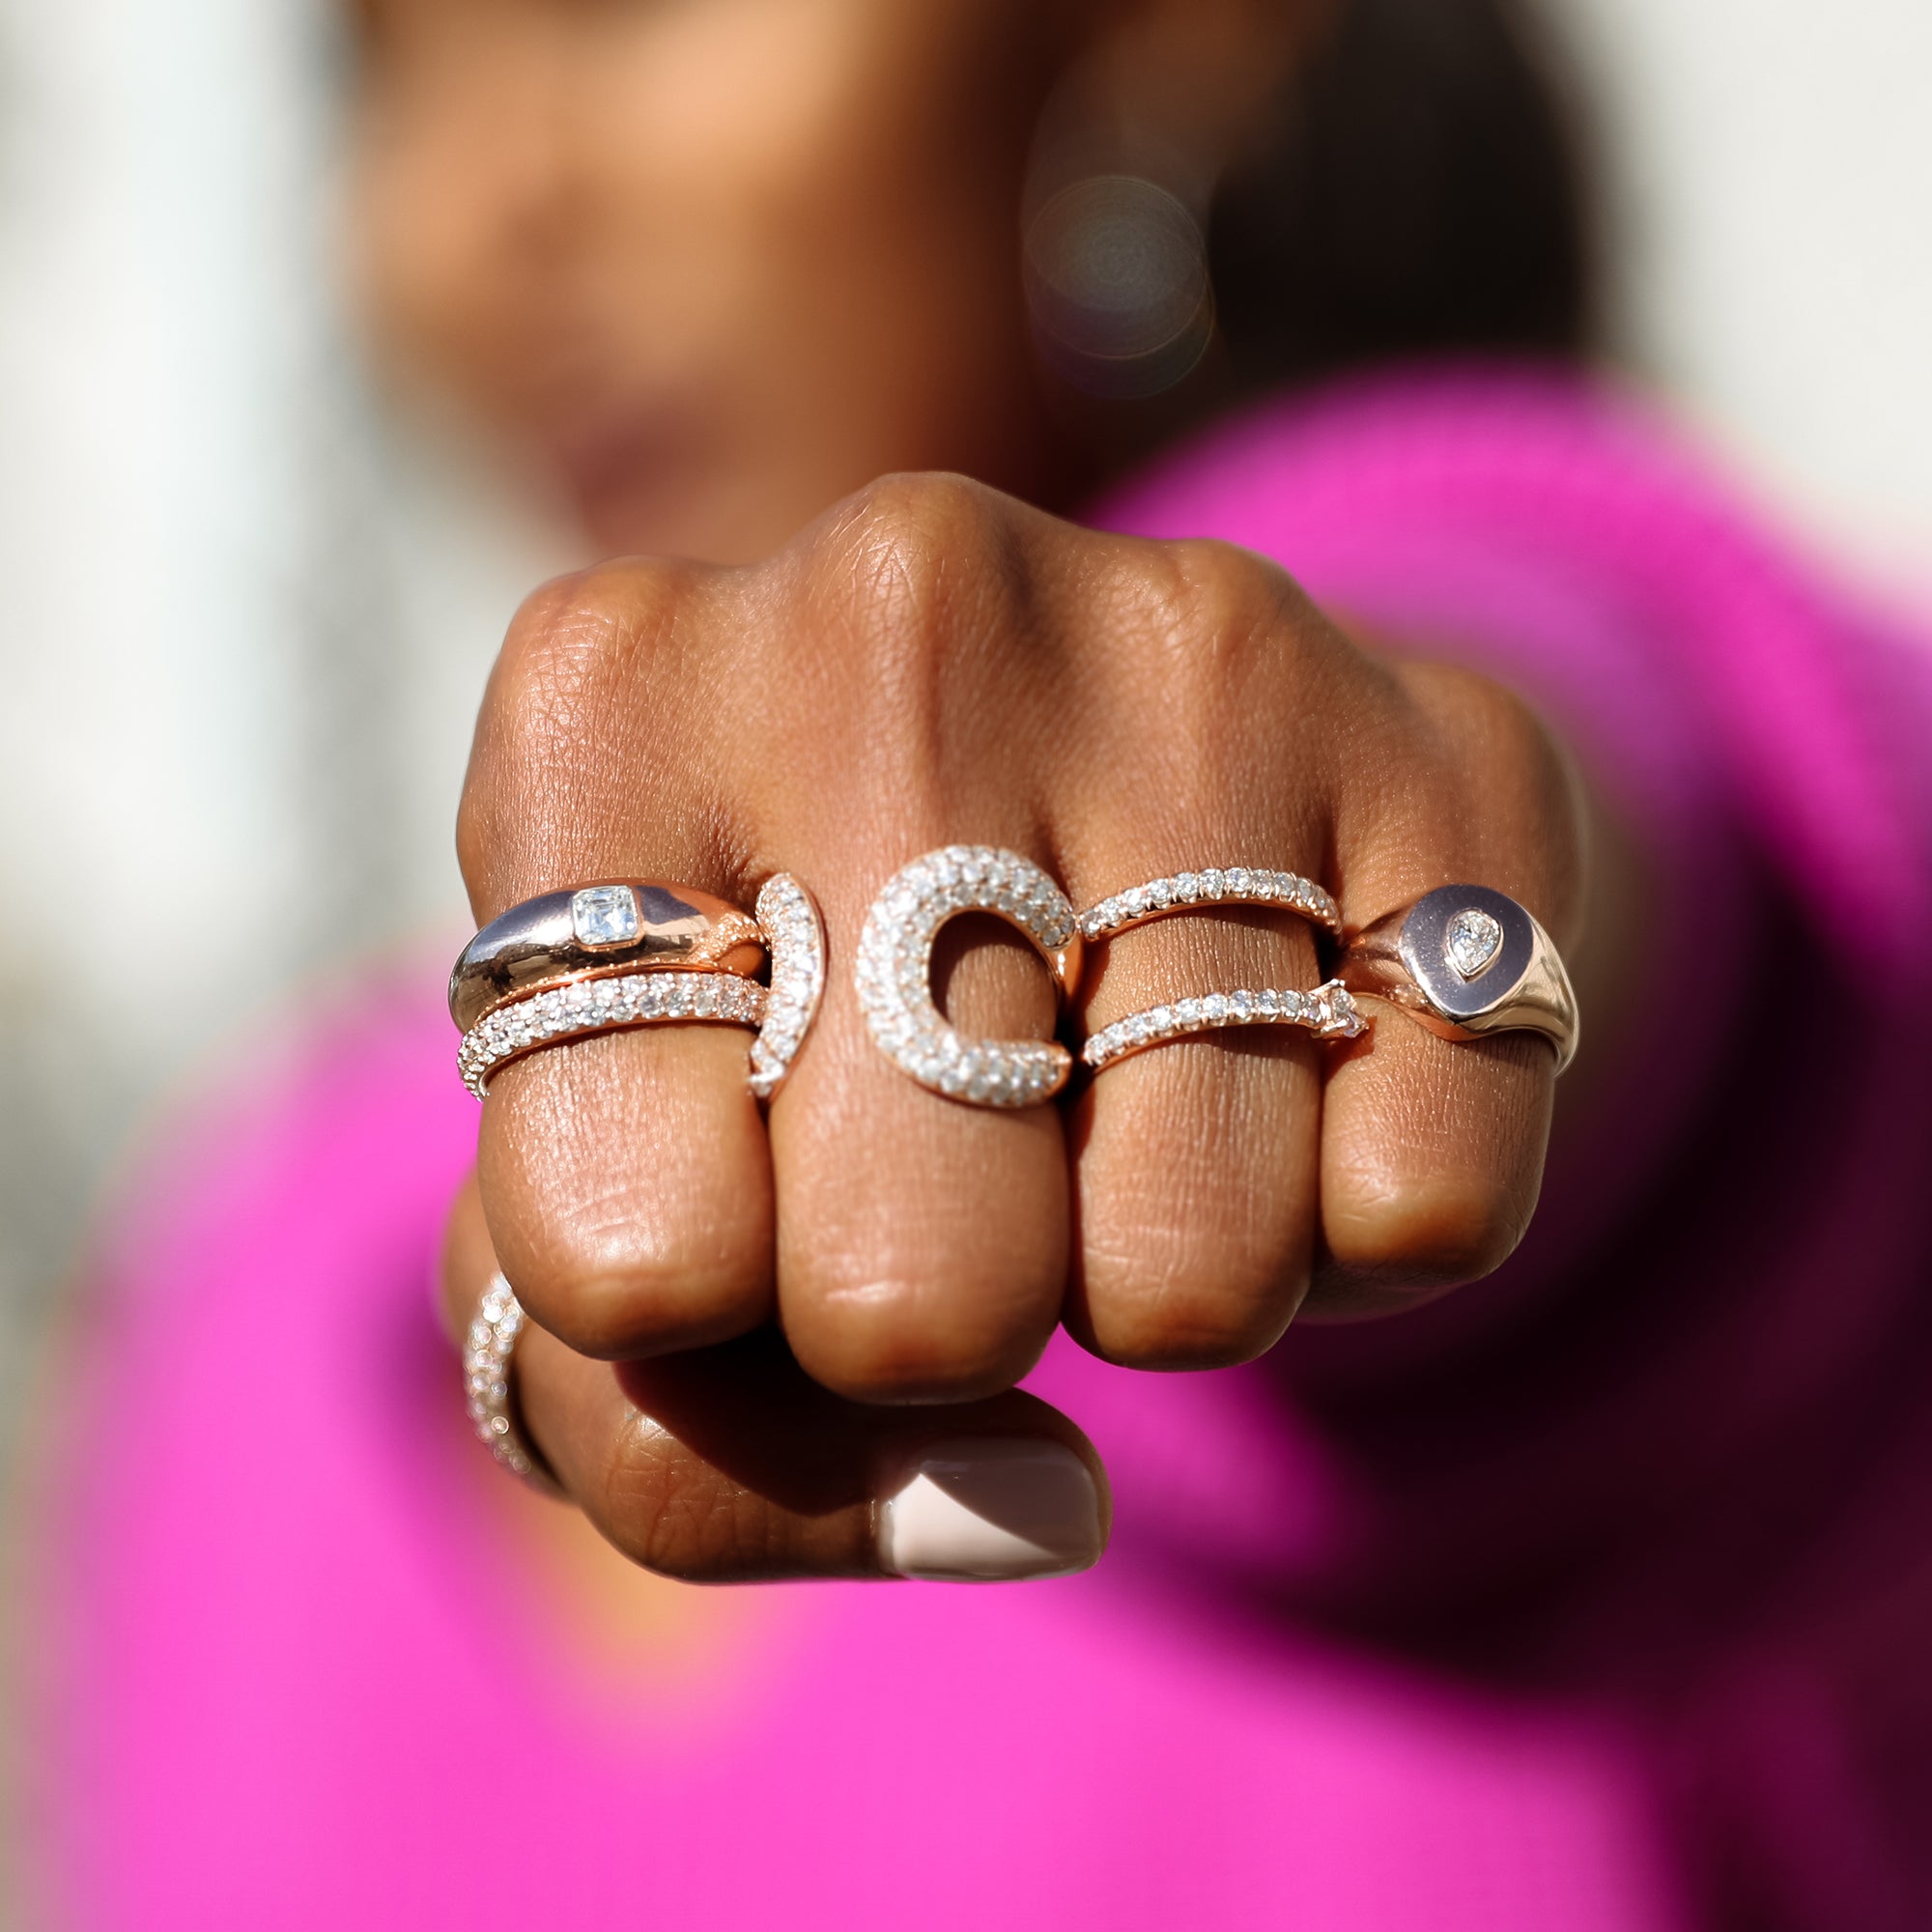 The Pear Pinky Ring shown modeled with the Serpent Ring, Medusa Ring, Asscher Dome Band, and Infinity Thumb Ring.